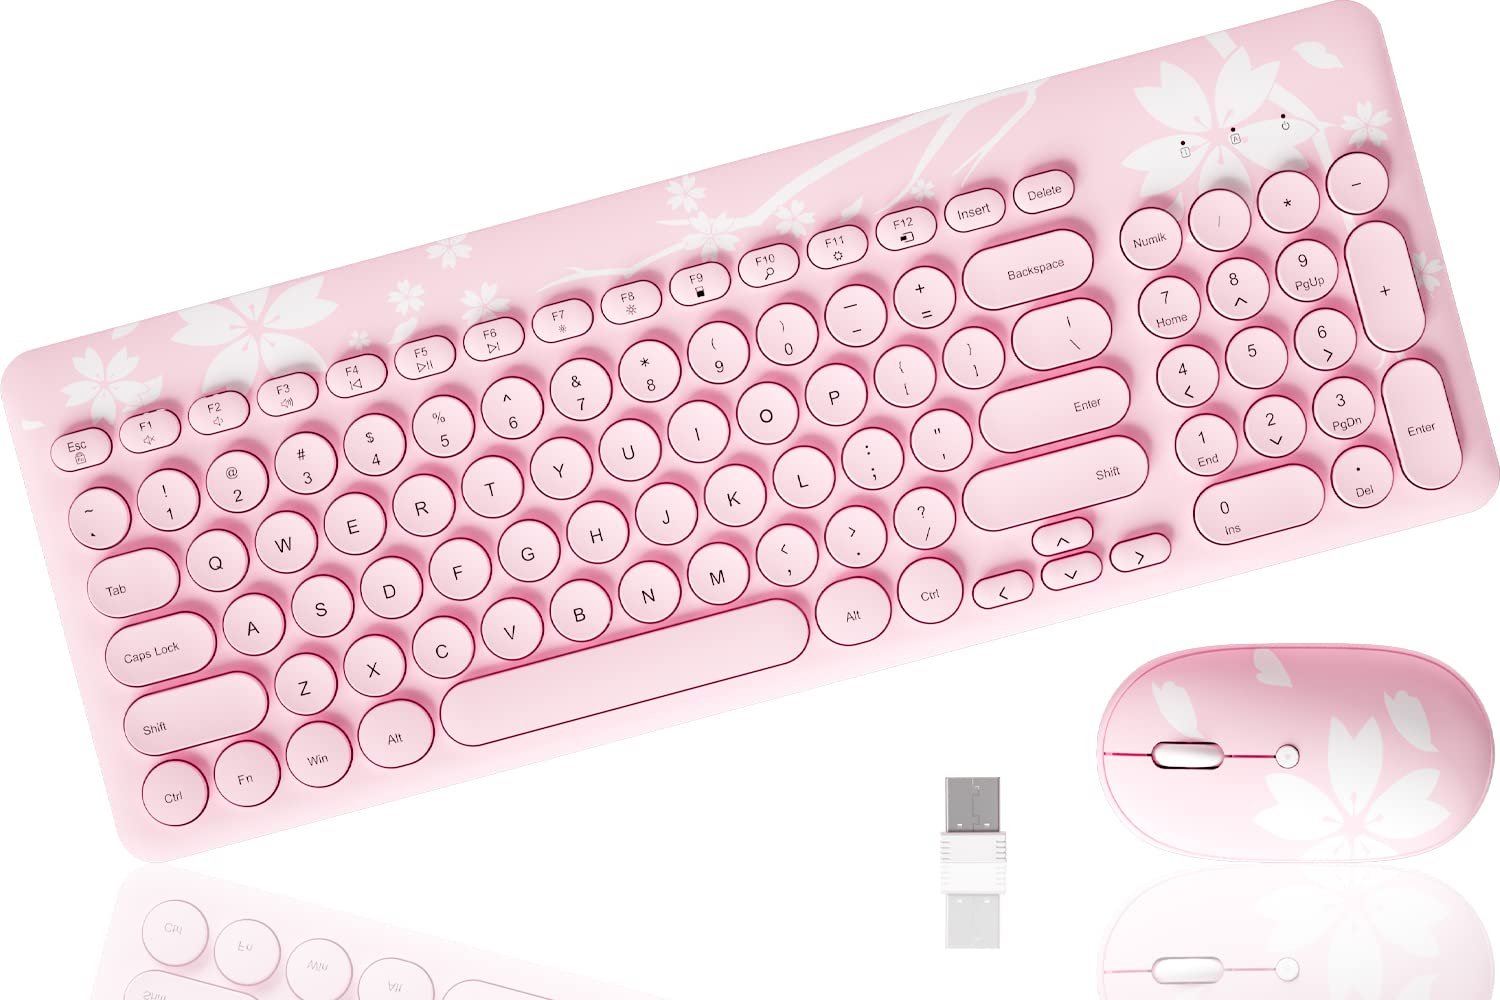 Kawaii Keyboards Review: Benefits Explained